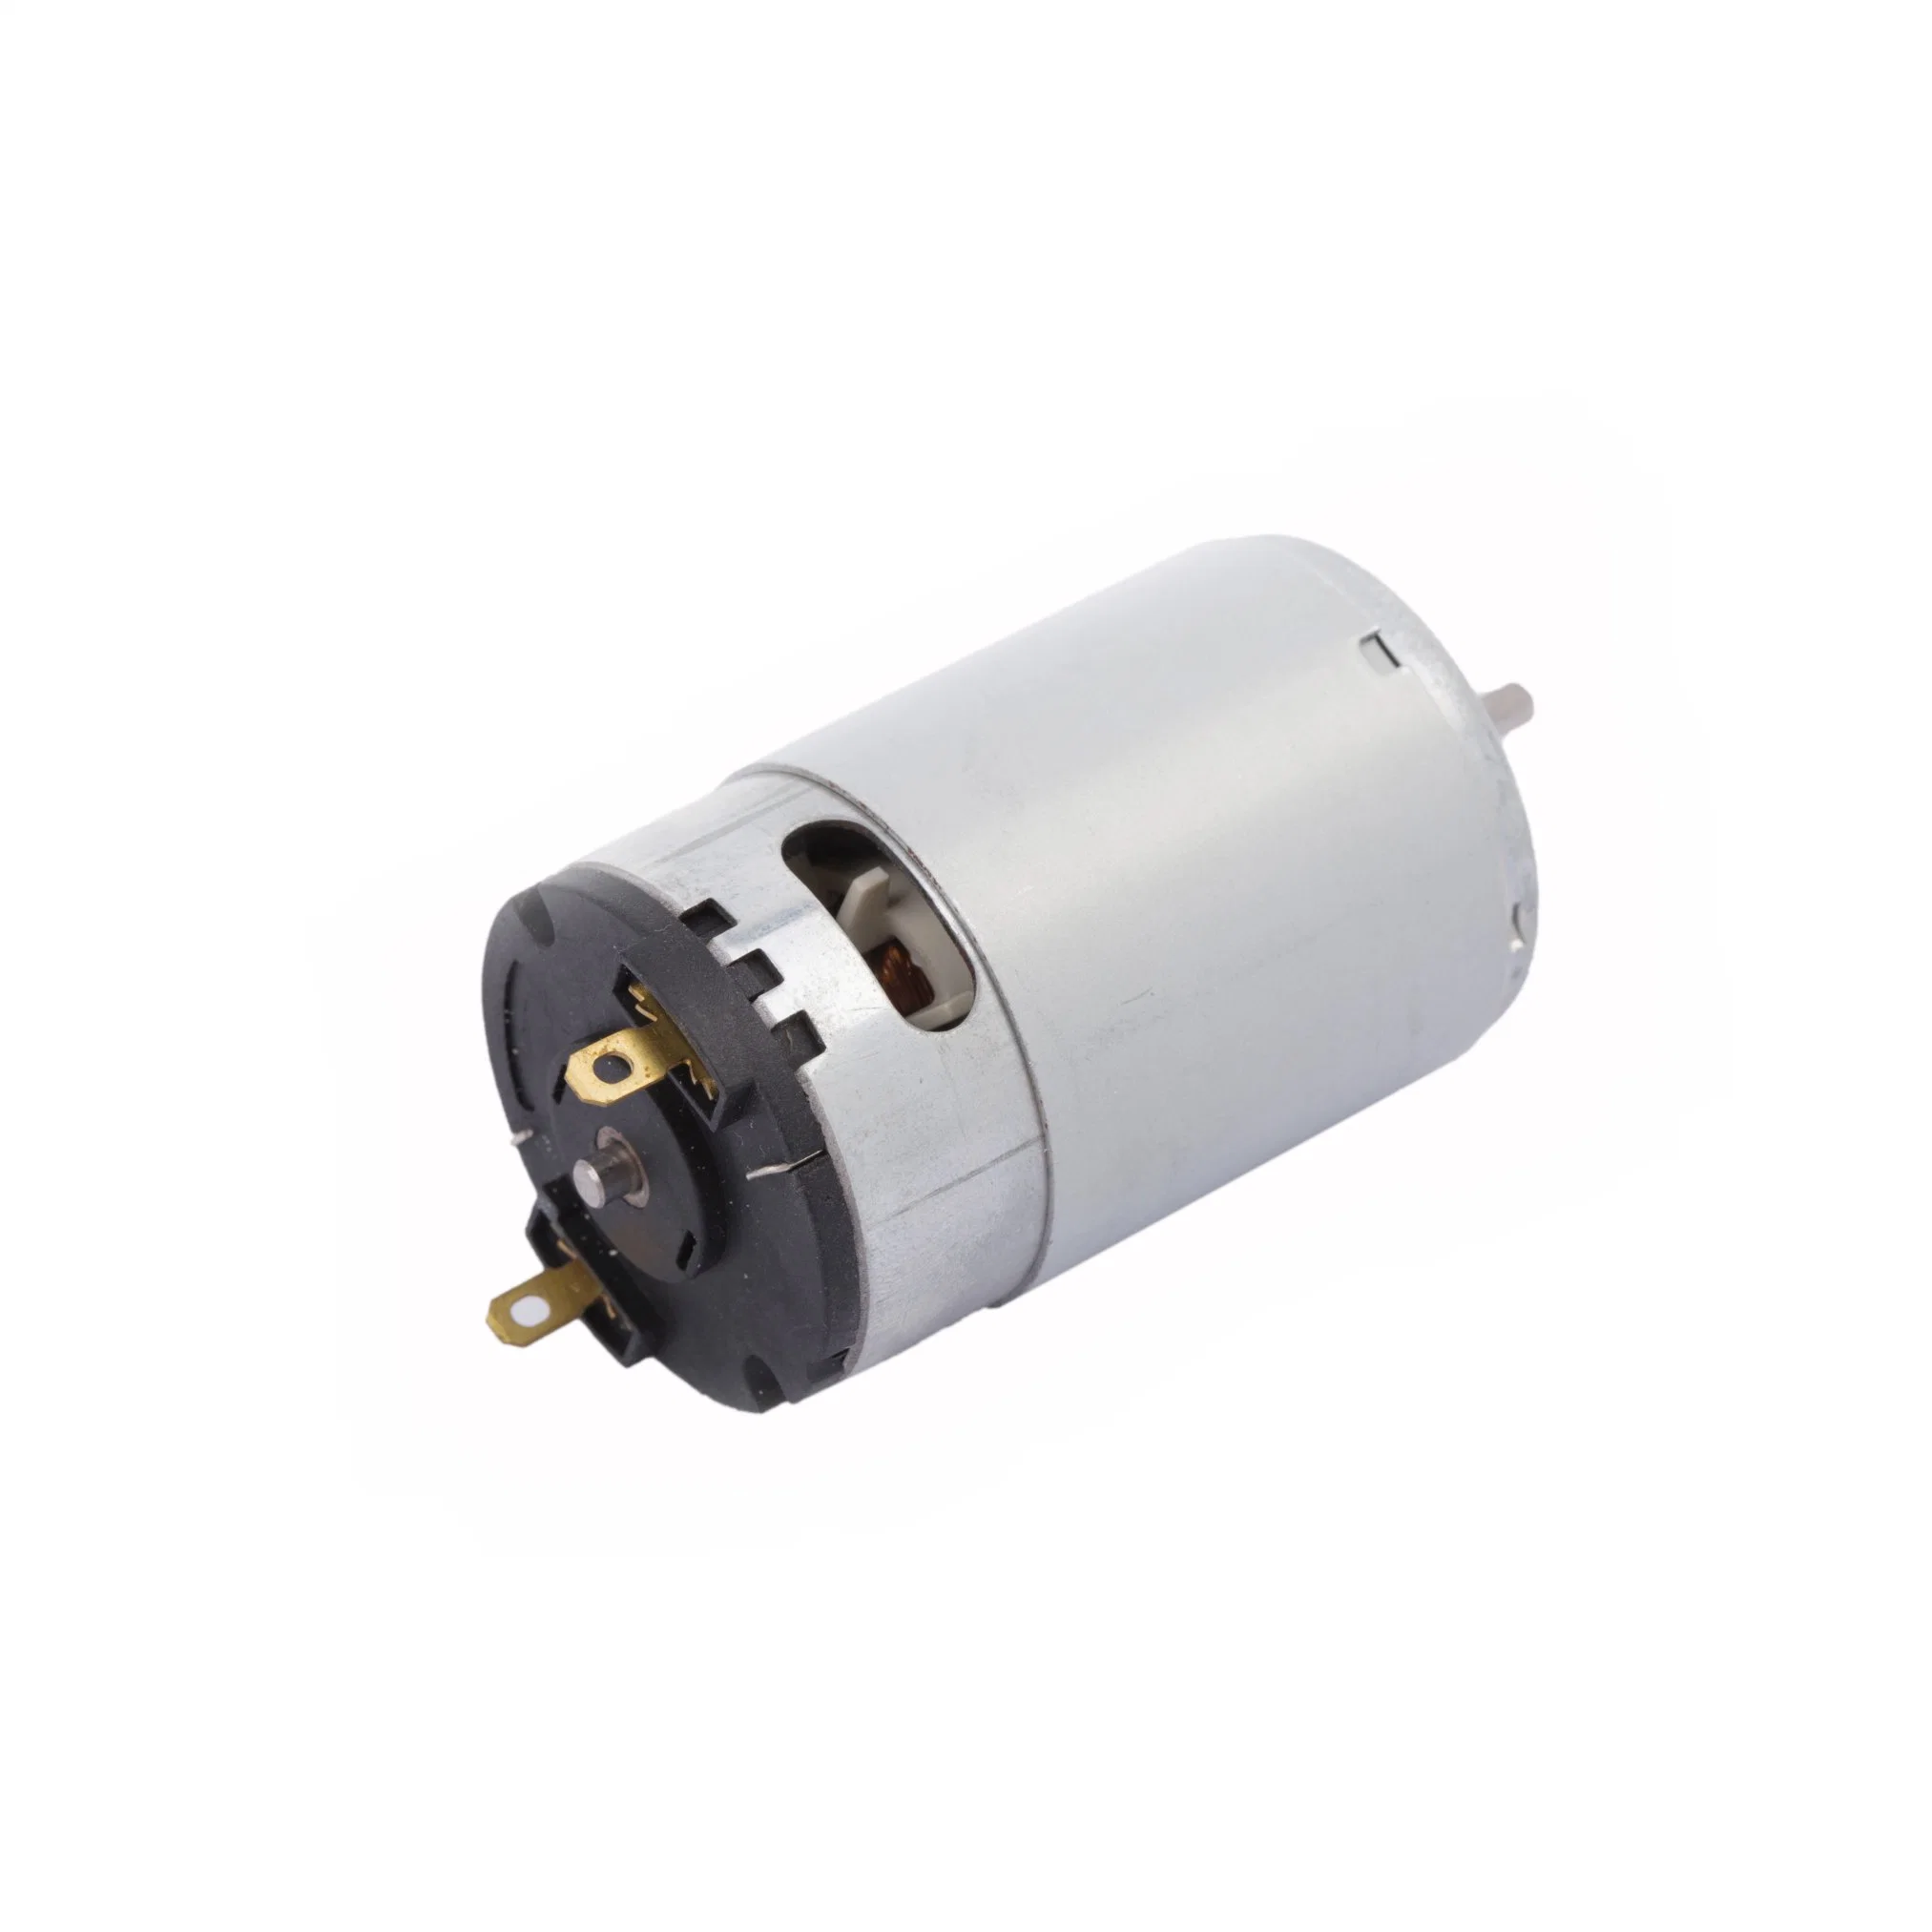 Kinmore Price Clutch Direct Drive DC Motor for Vacuum Cleaner, Window Actuator